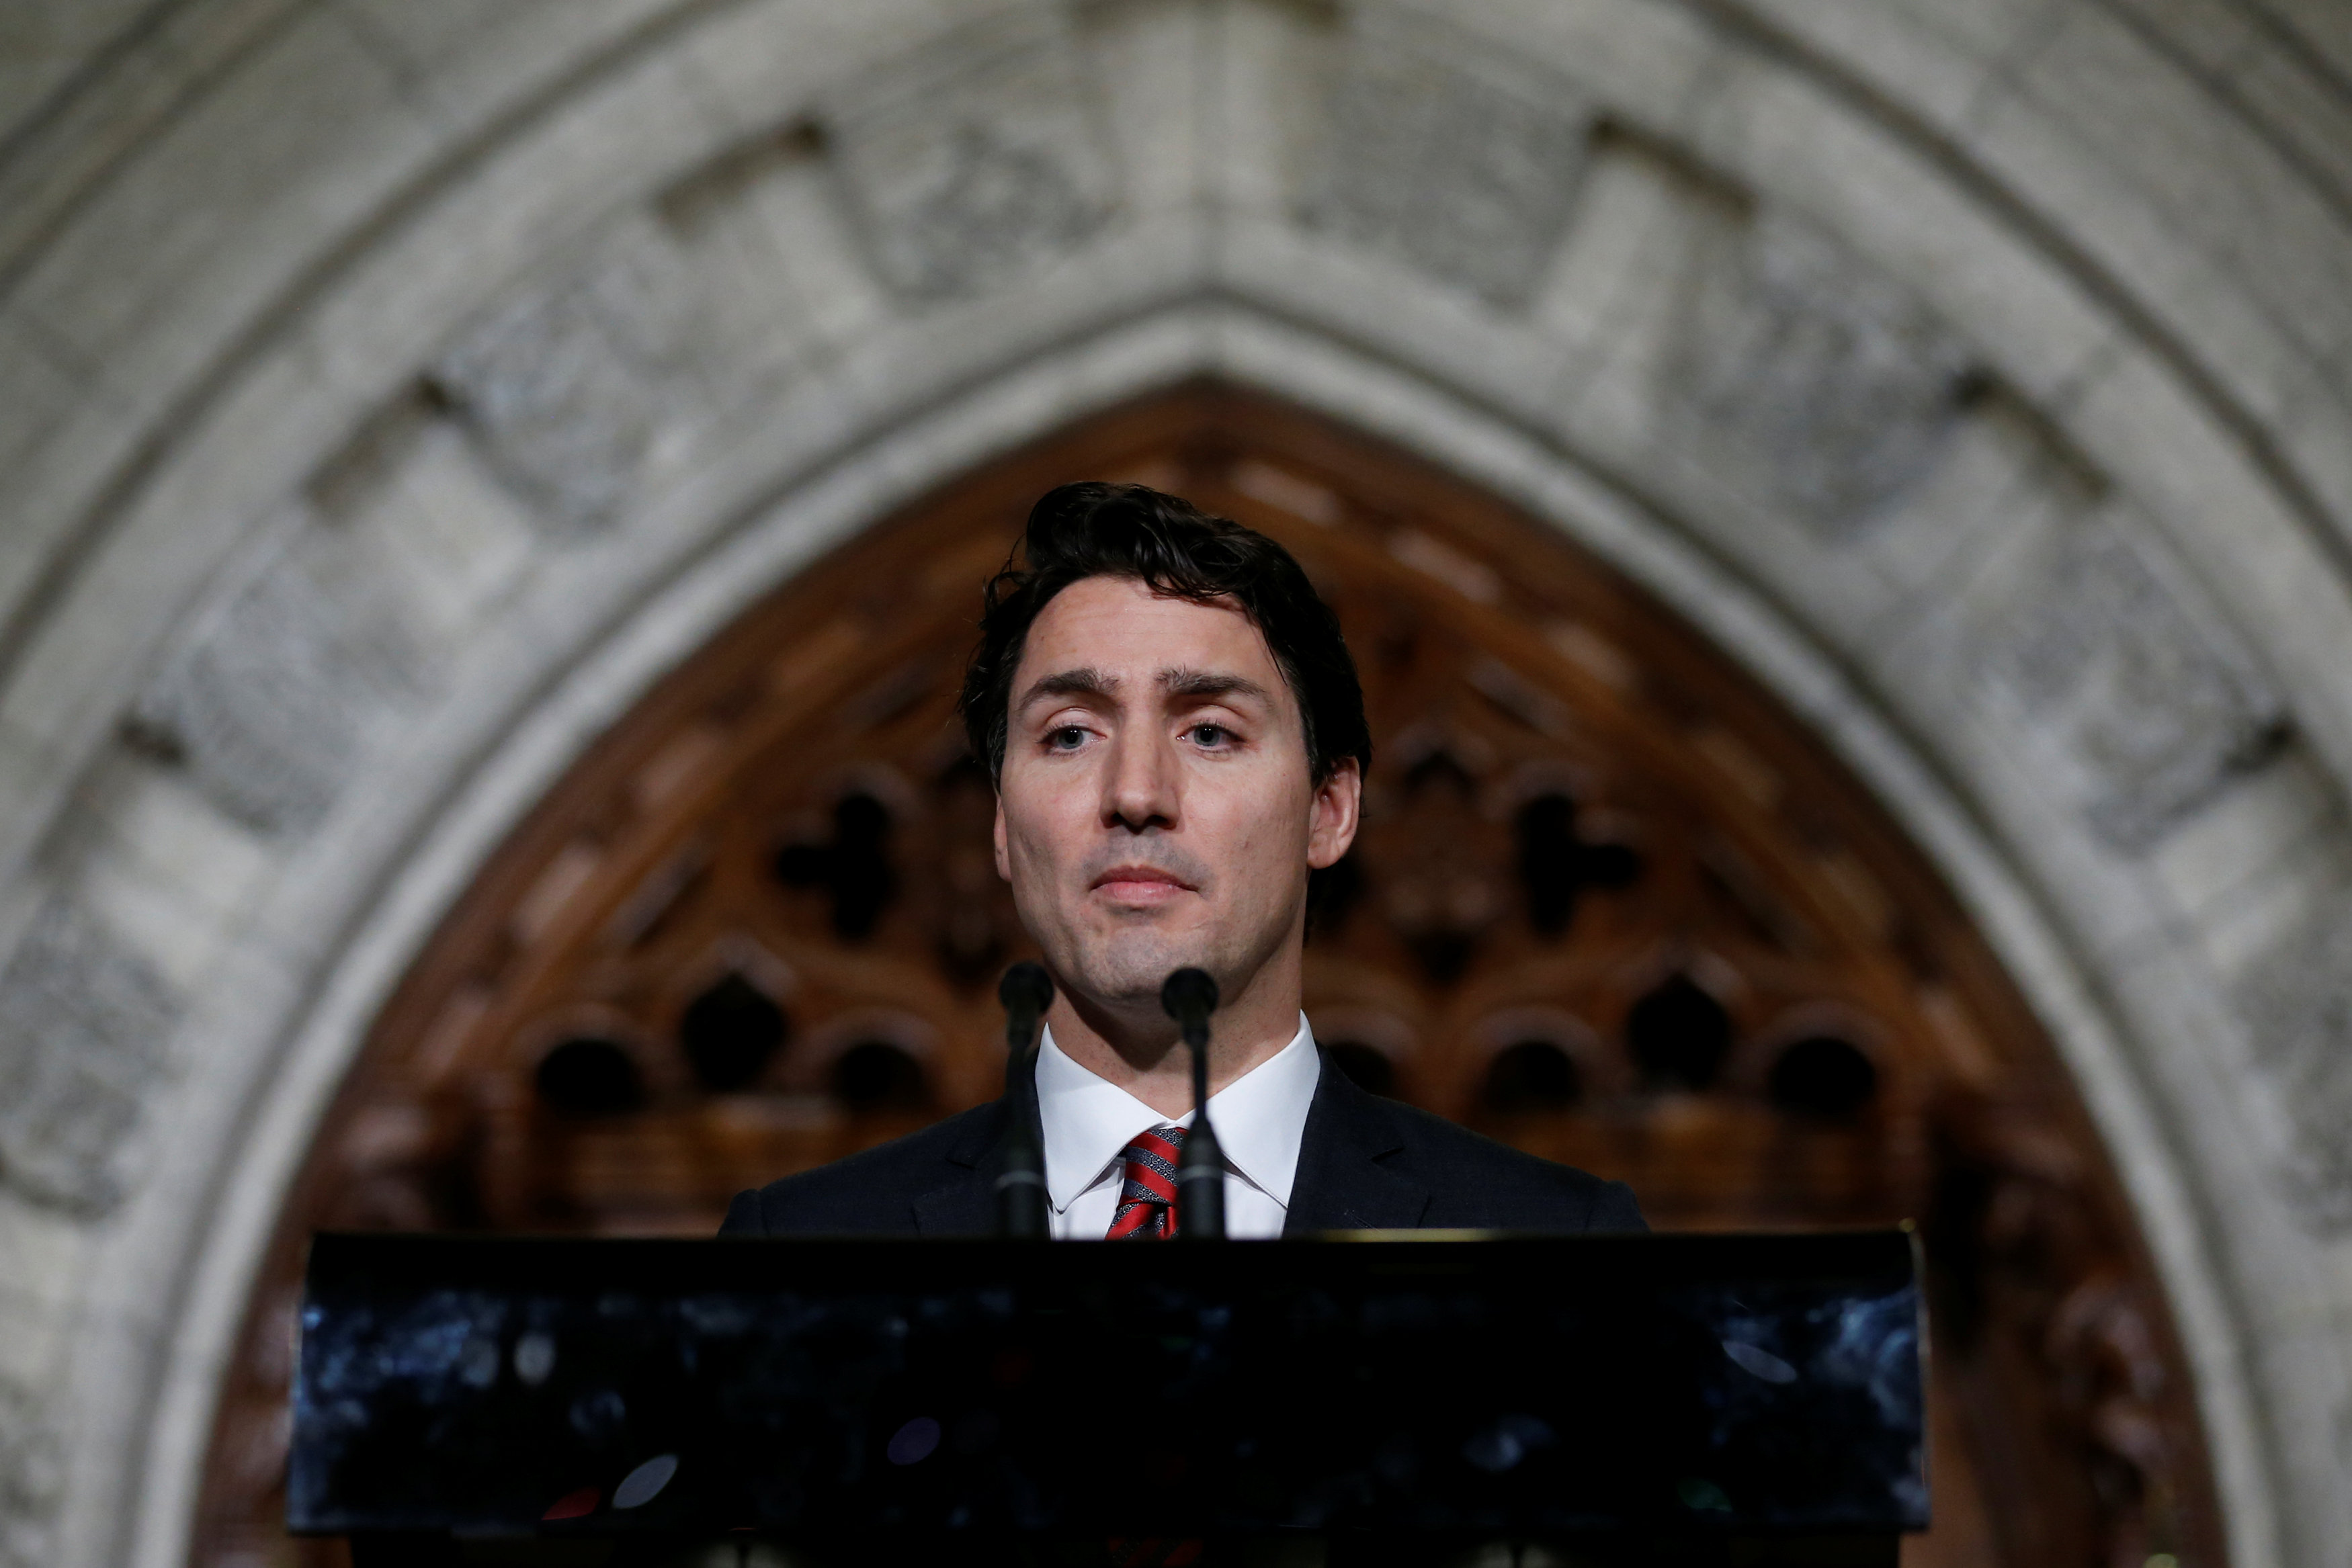 Canada's Prime Minister Justin Trudeau takes part in a news conference on Parliament Hill in Ottawa, Ontario, Canada, December 15, 2016. REUTERS/Chris Wattie